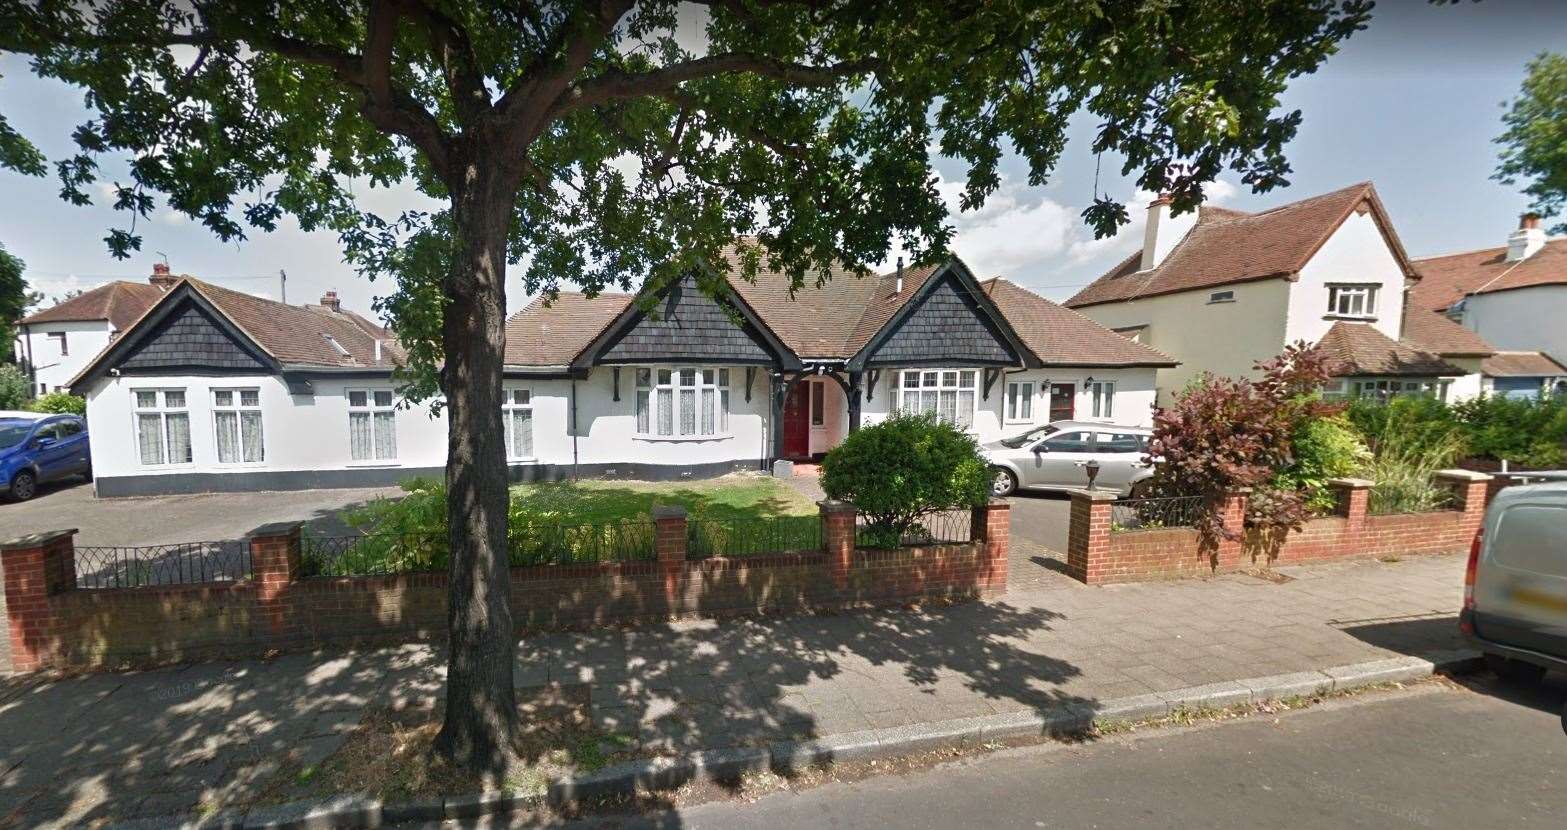 The Spenser Road, Herne Bay, care home has been placed closed down by Optima. Picture: Google